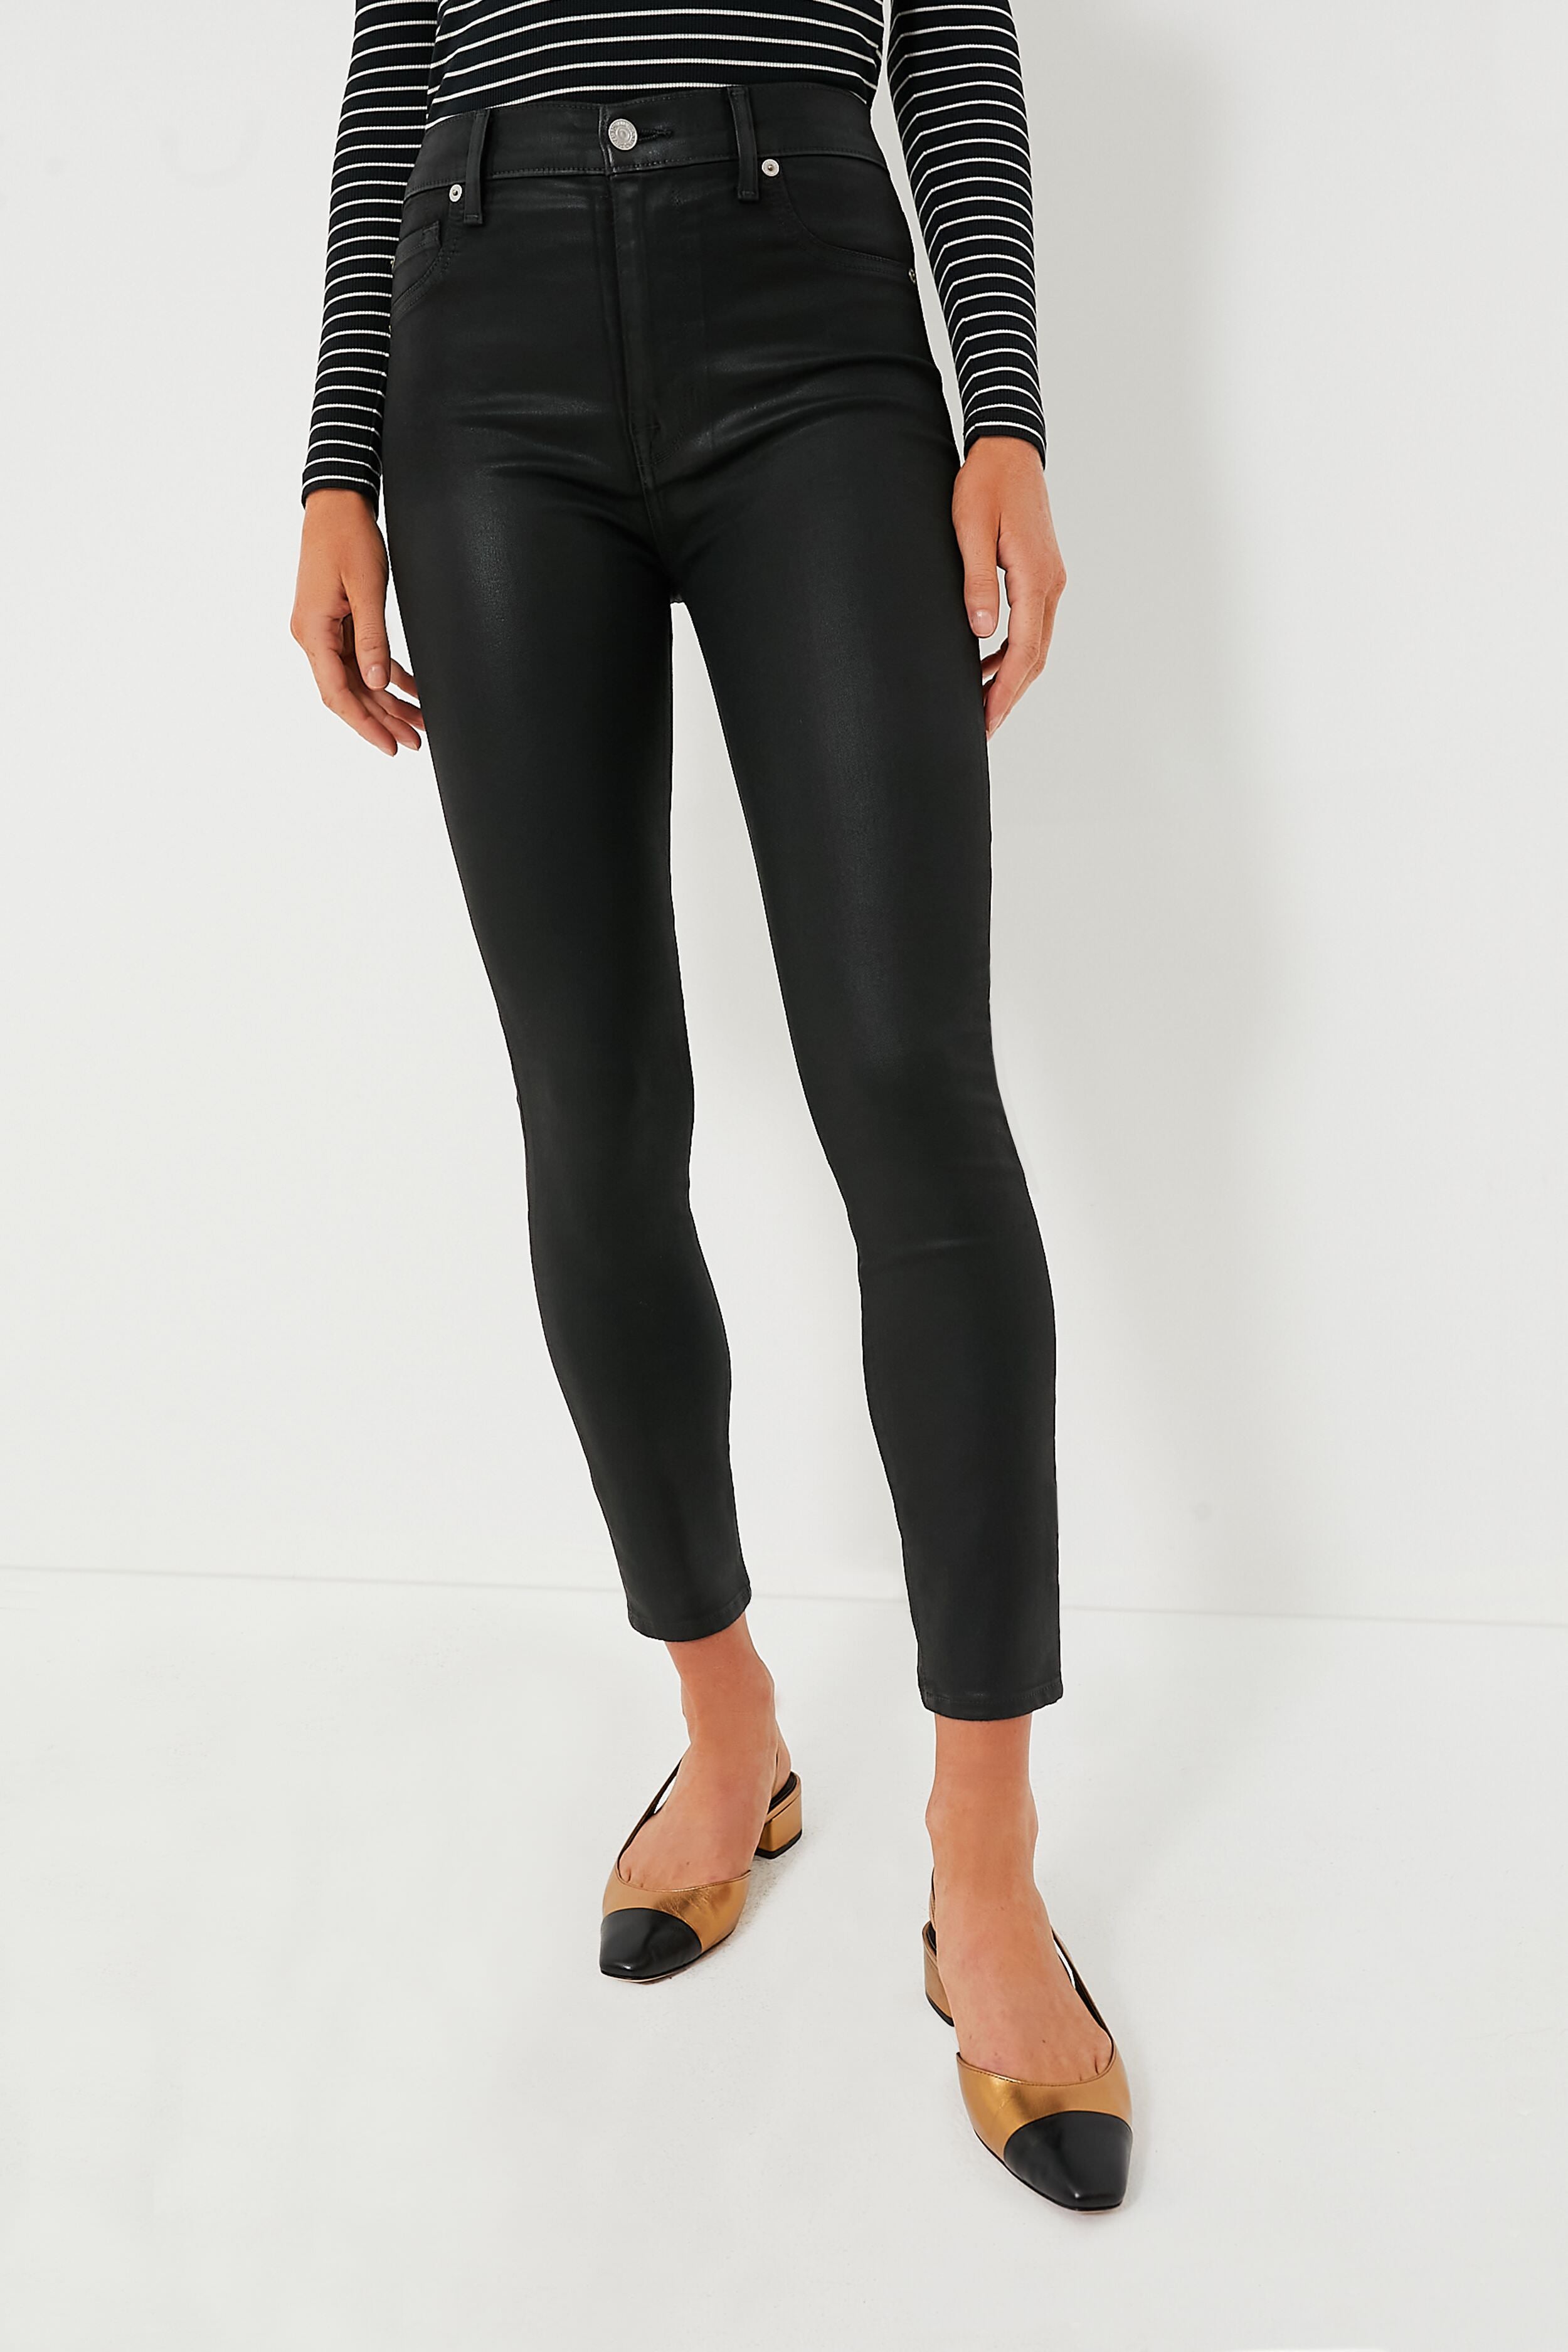 Melody Wear Leather Look Jeggings Mid Waist Black Coated